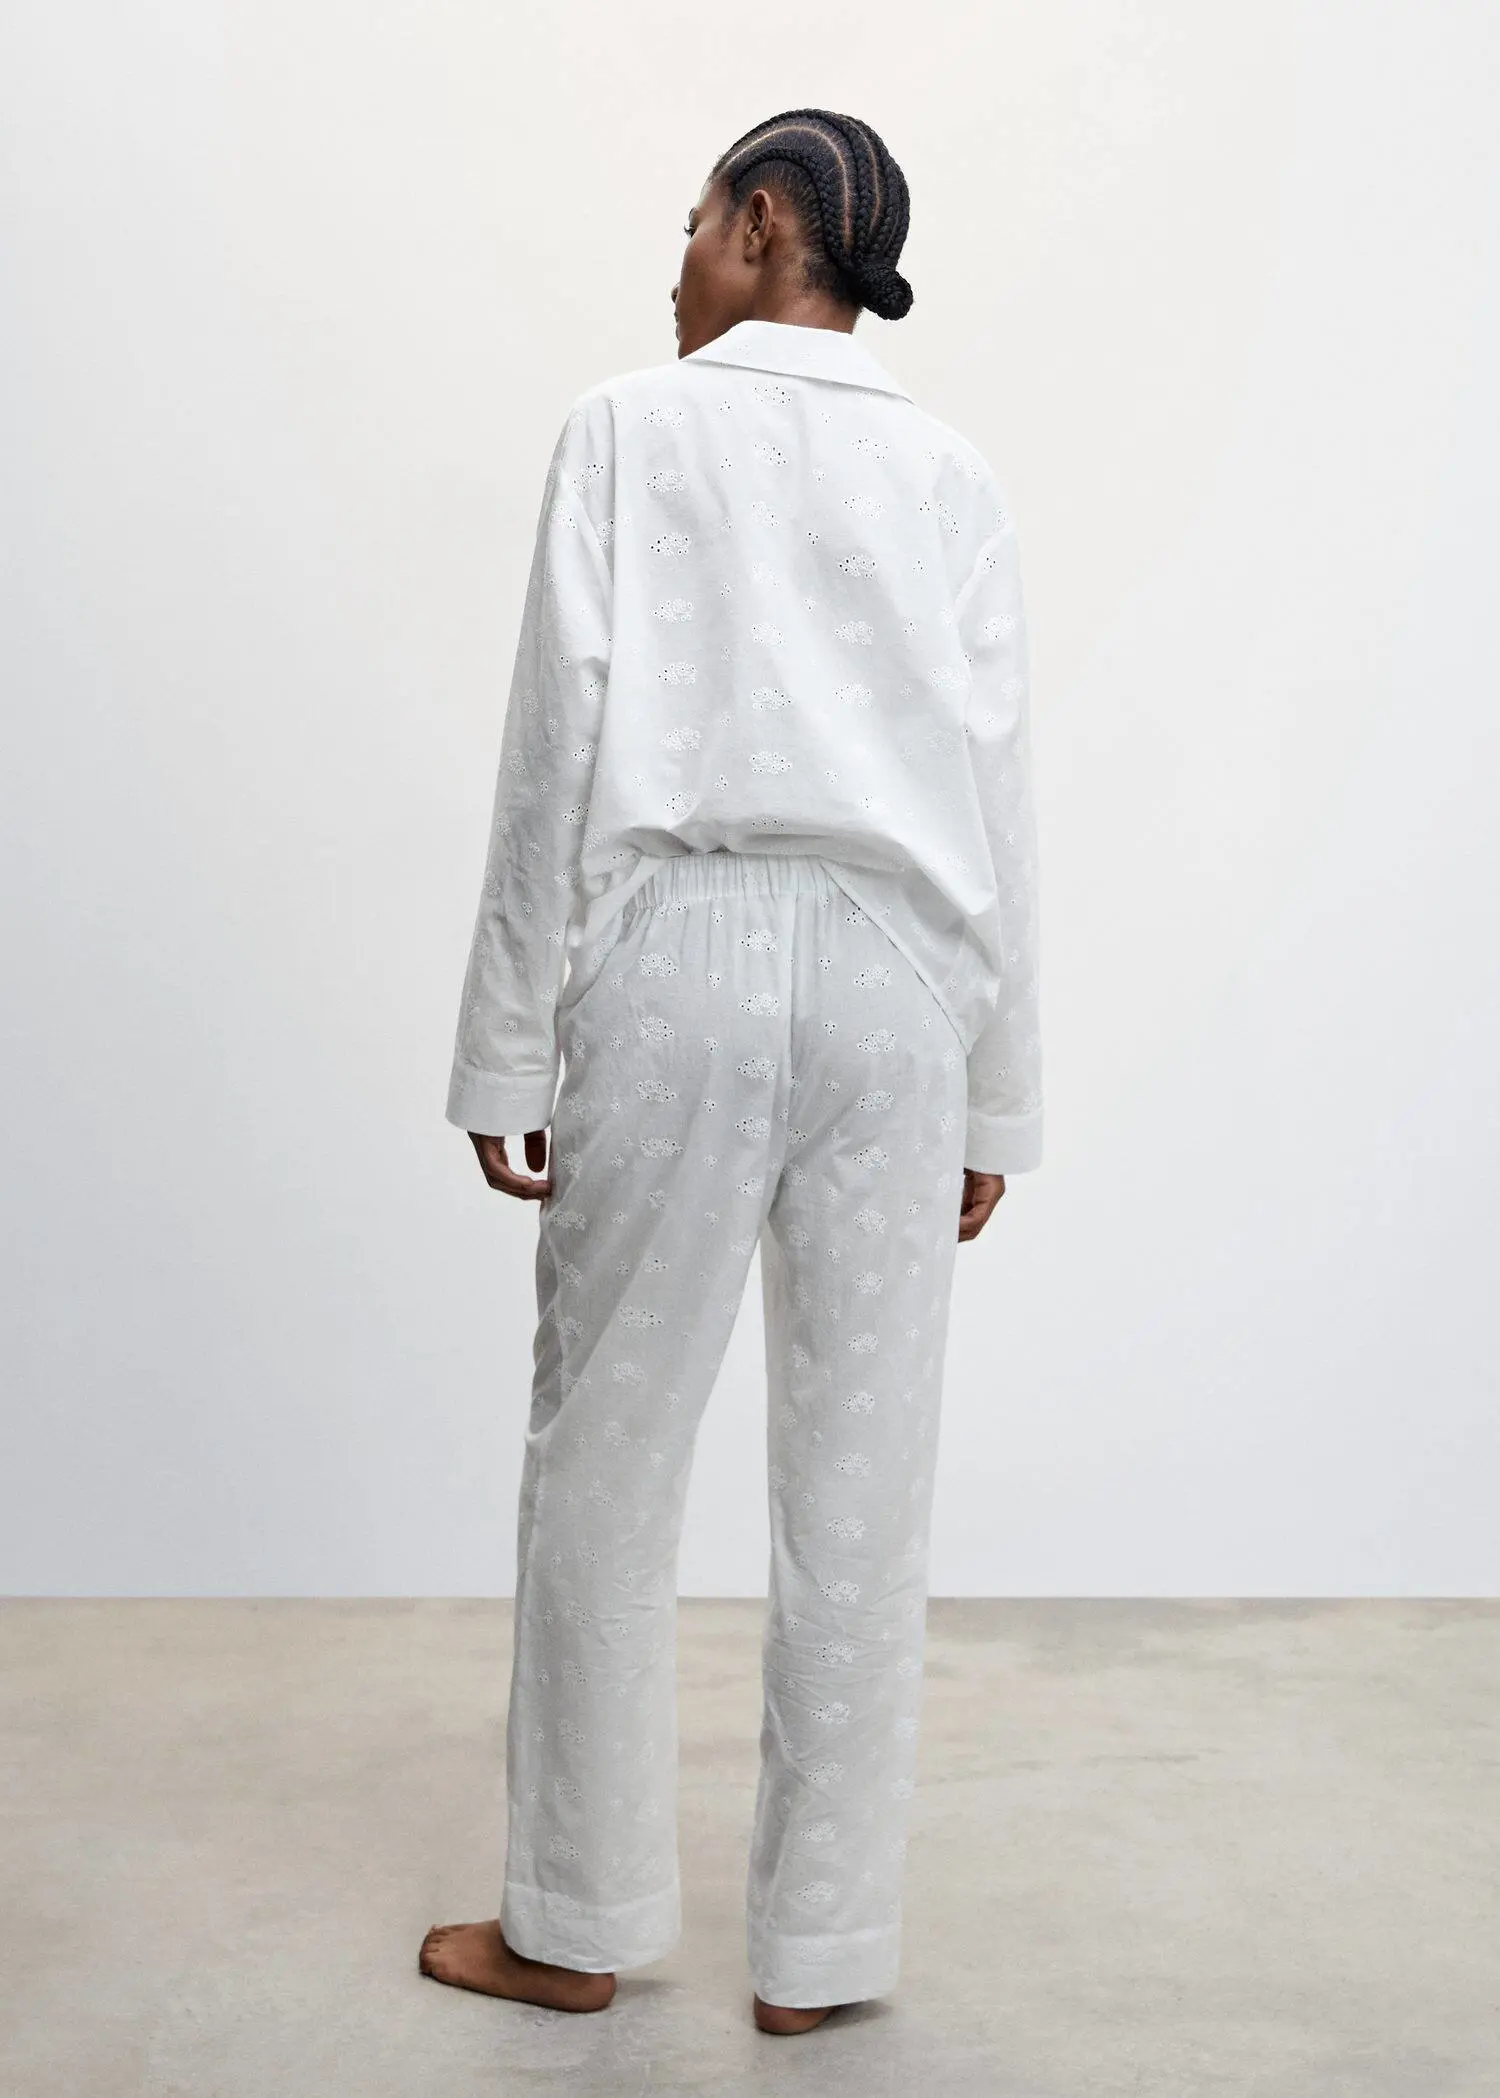 Mango Pajama pants with openwork details. a person wearing a white shirt and pants. 